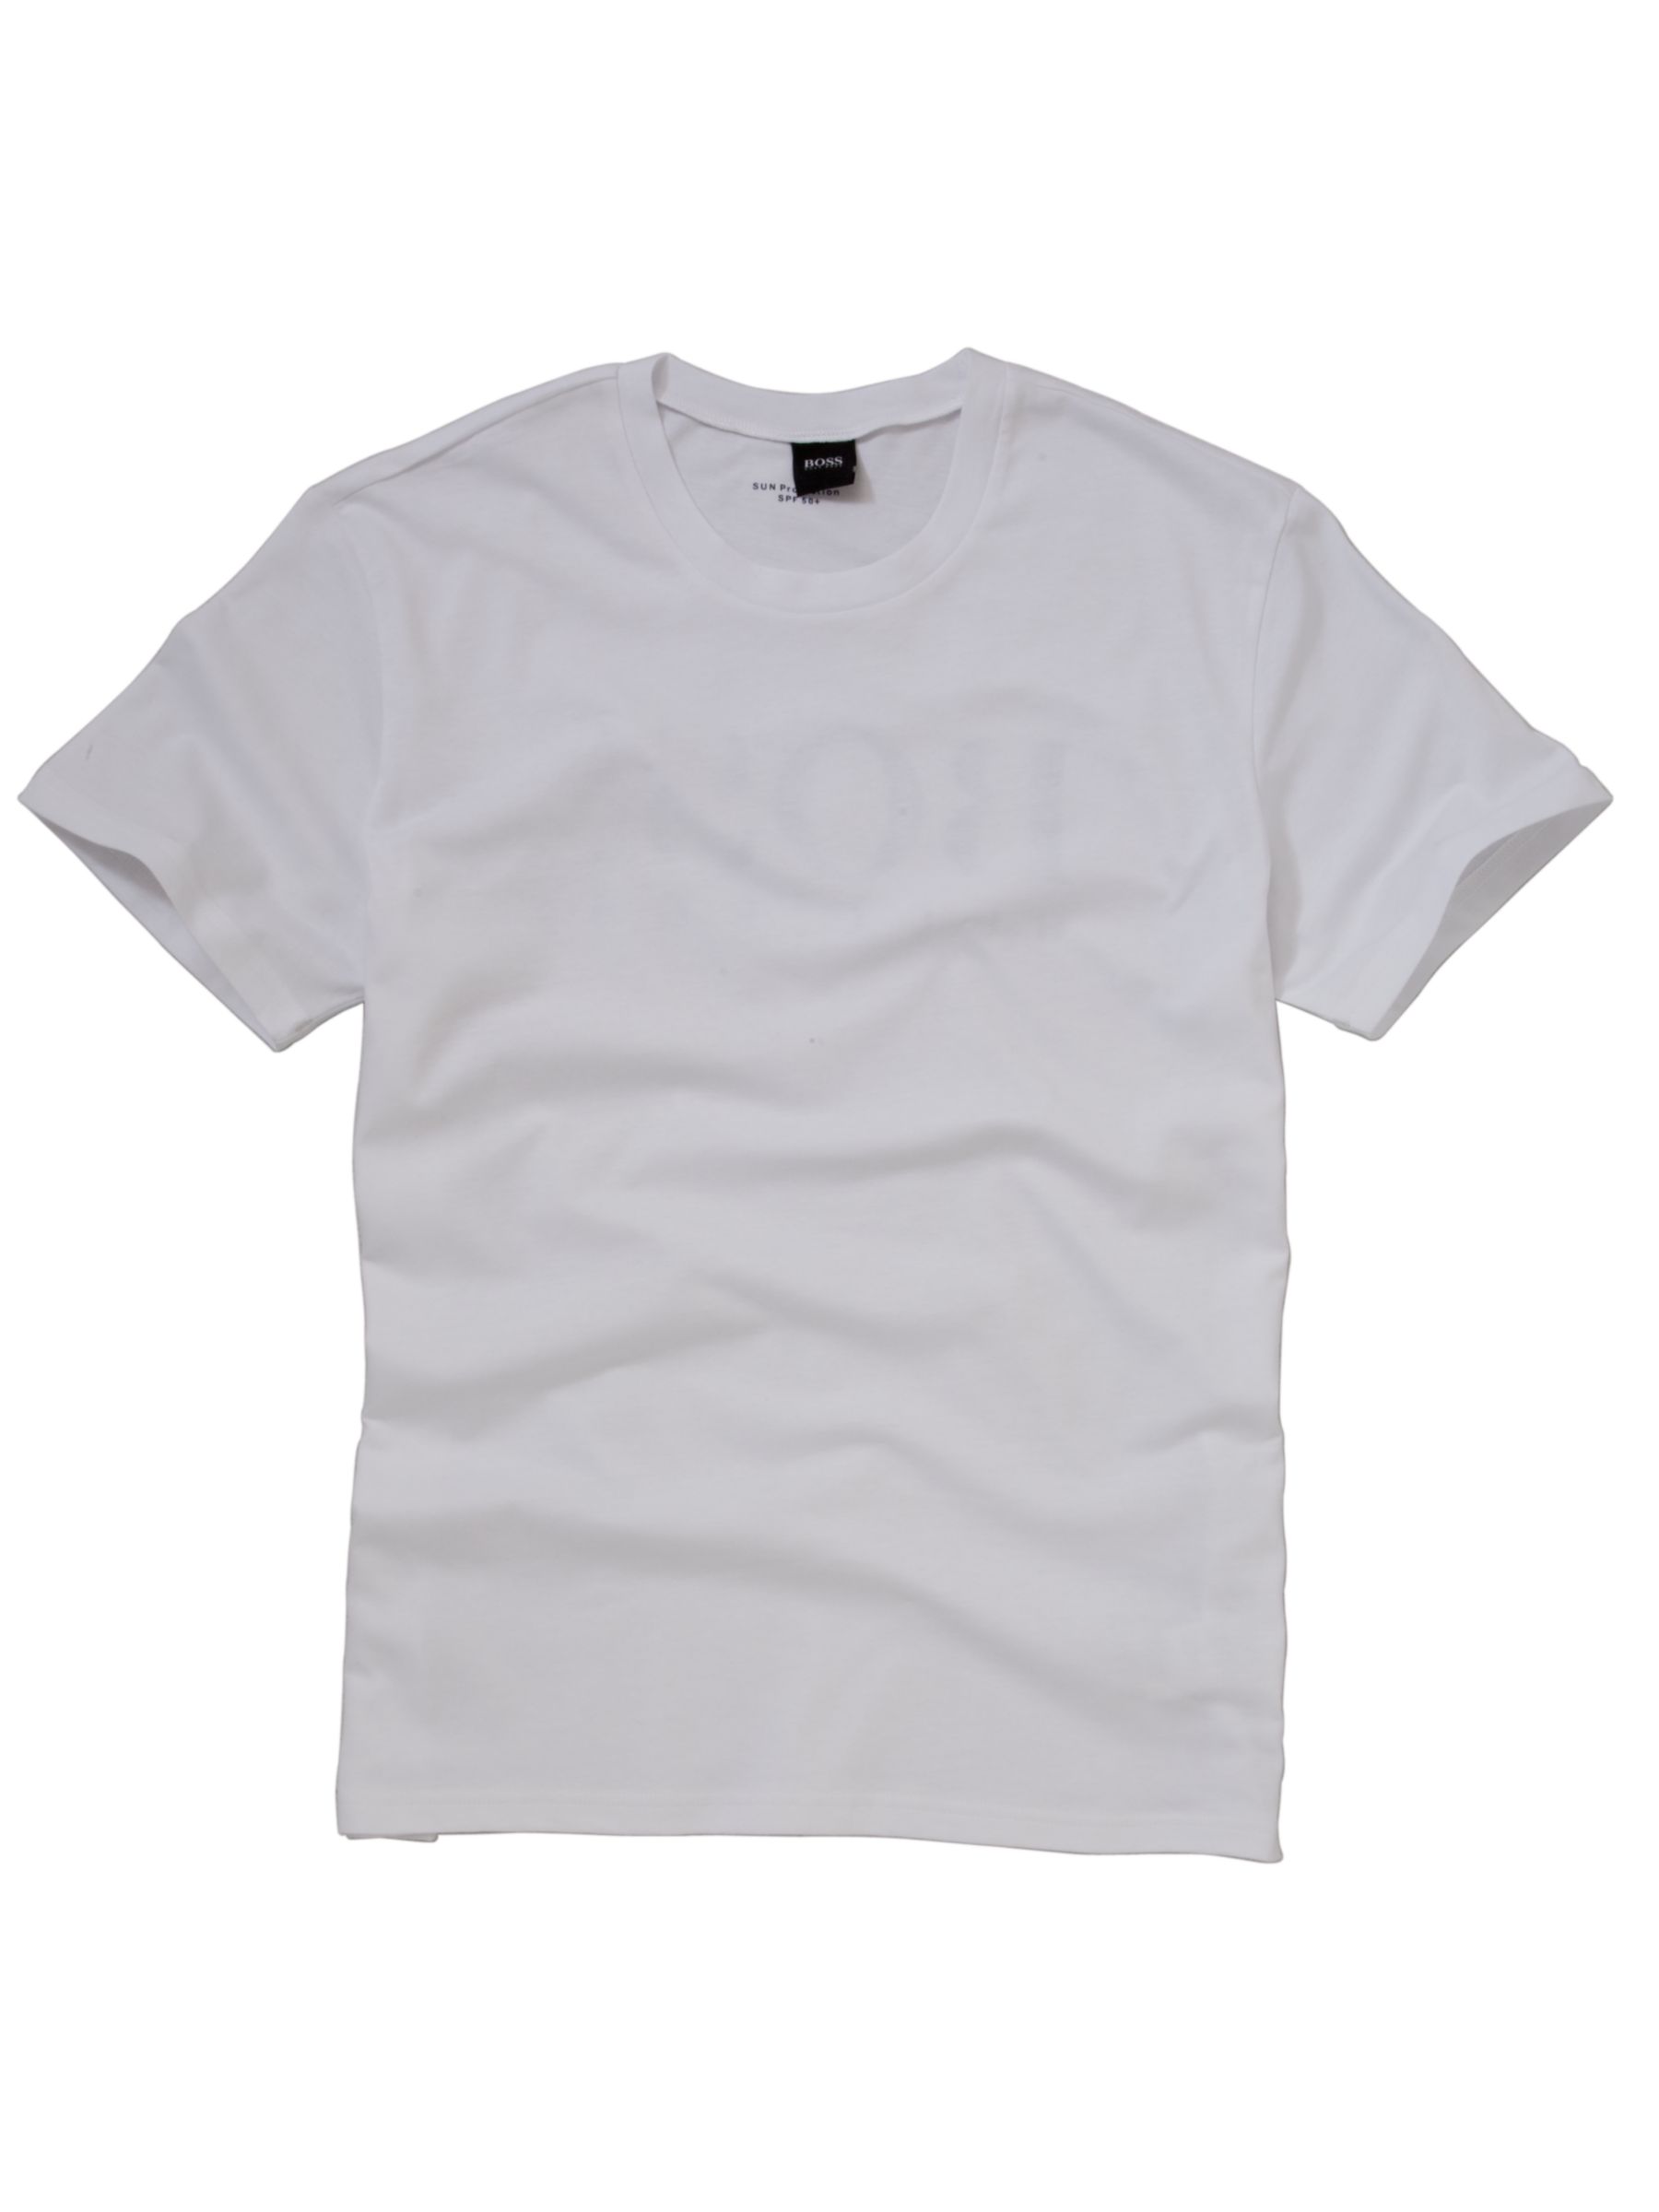 Hugo Boss Beach Logo T-Shirt, White - review, compare prices, buy online